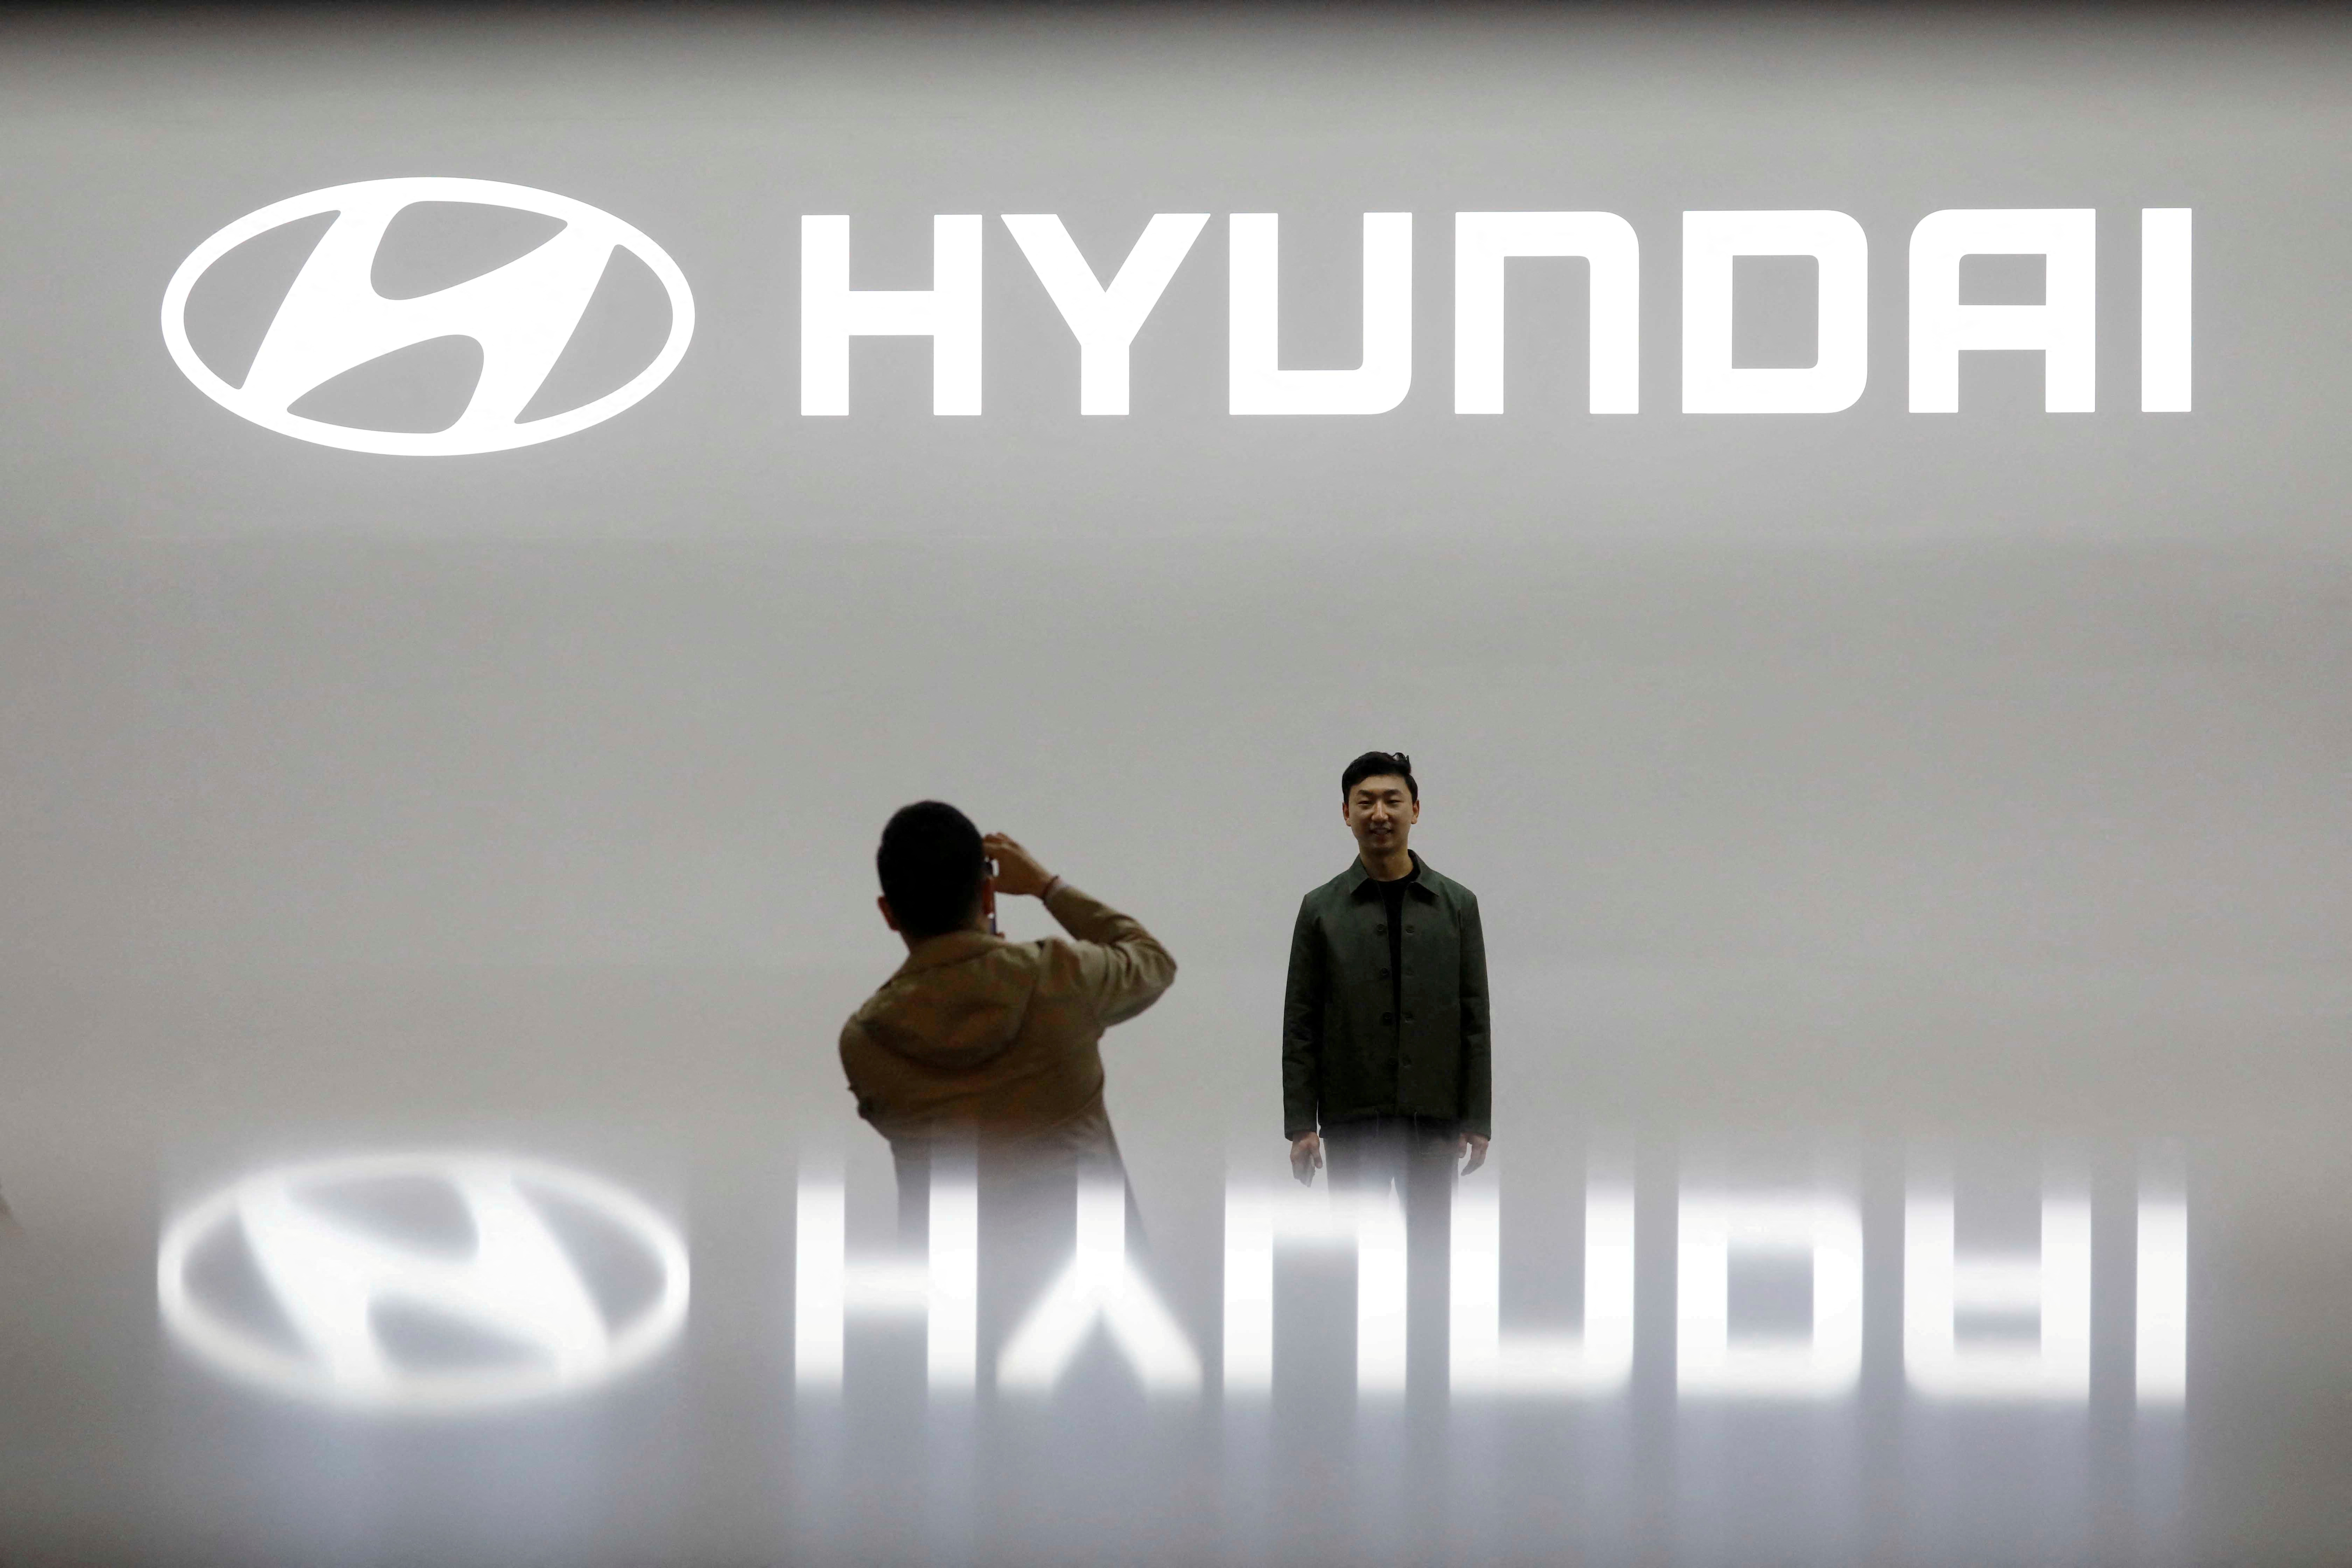 Visitors take photographs in front of the logo of Hyundai Motor during the 2019 Seoul Motor Show